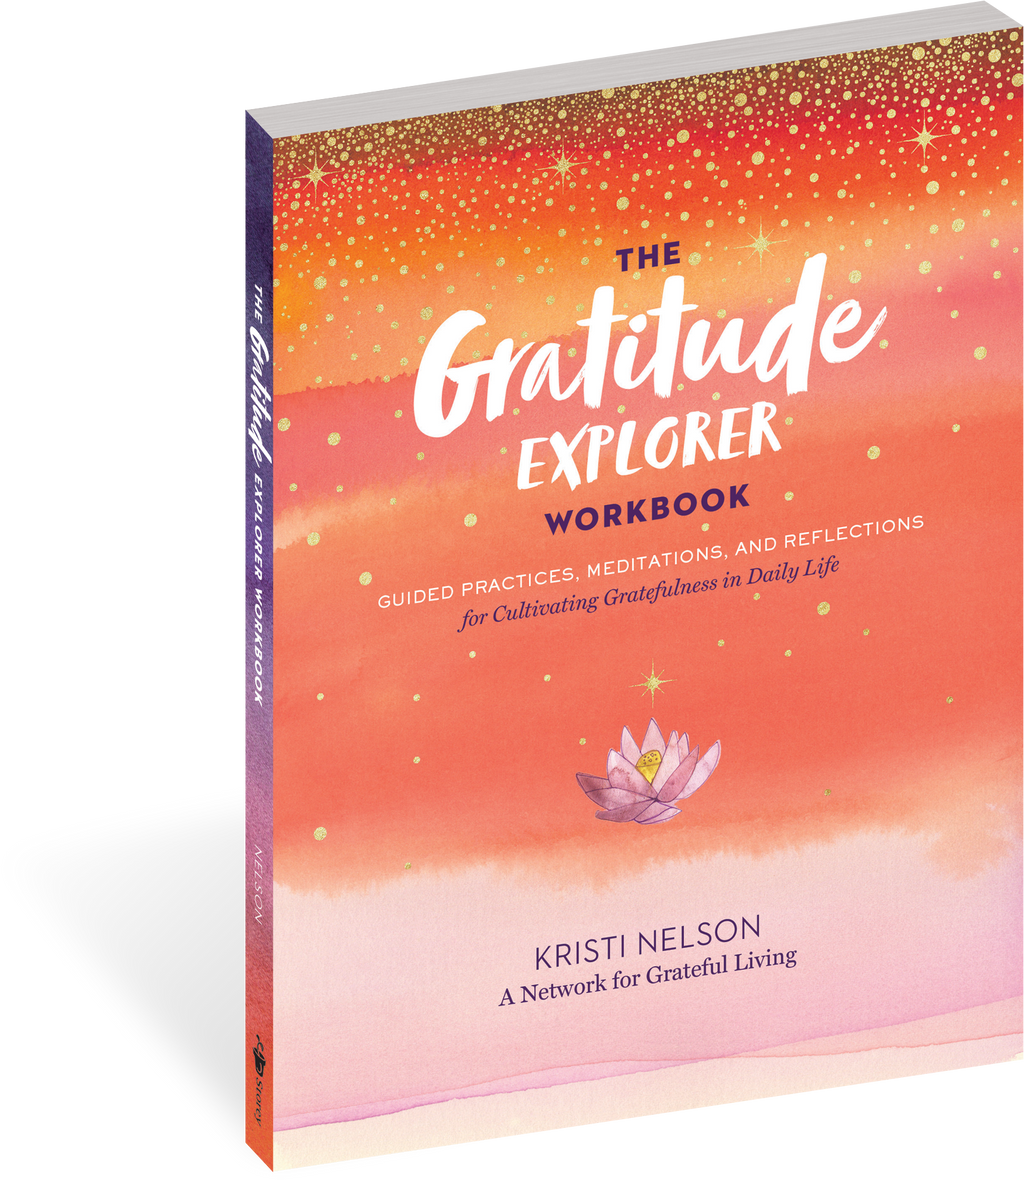 The Gratitude Explorer Workbook: Guided Practices, Meditations, and Reflections for Cultivating Gratefulness in Daily Life